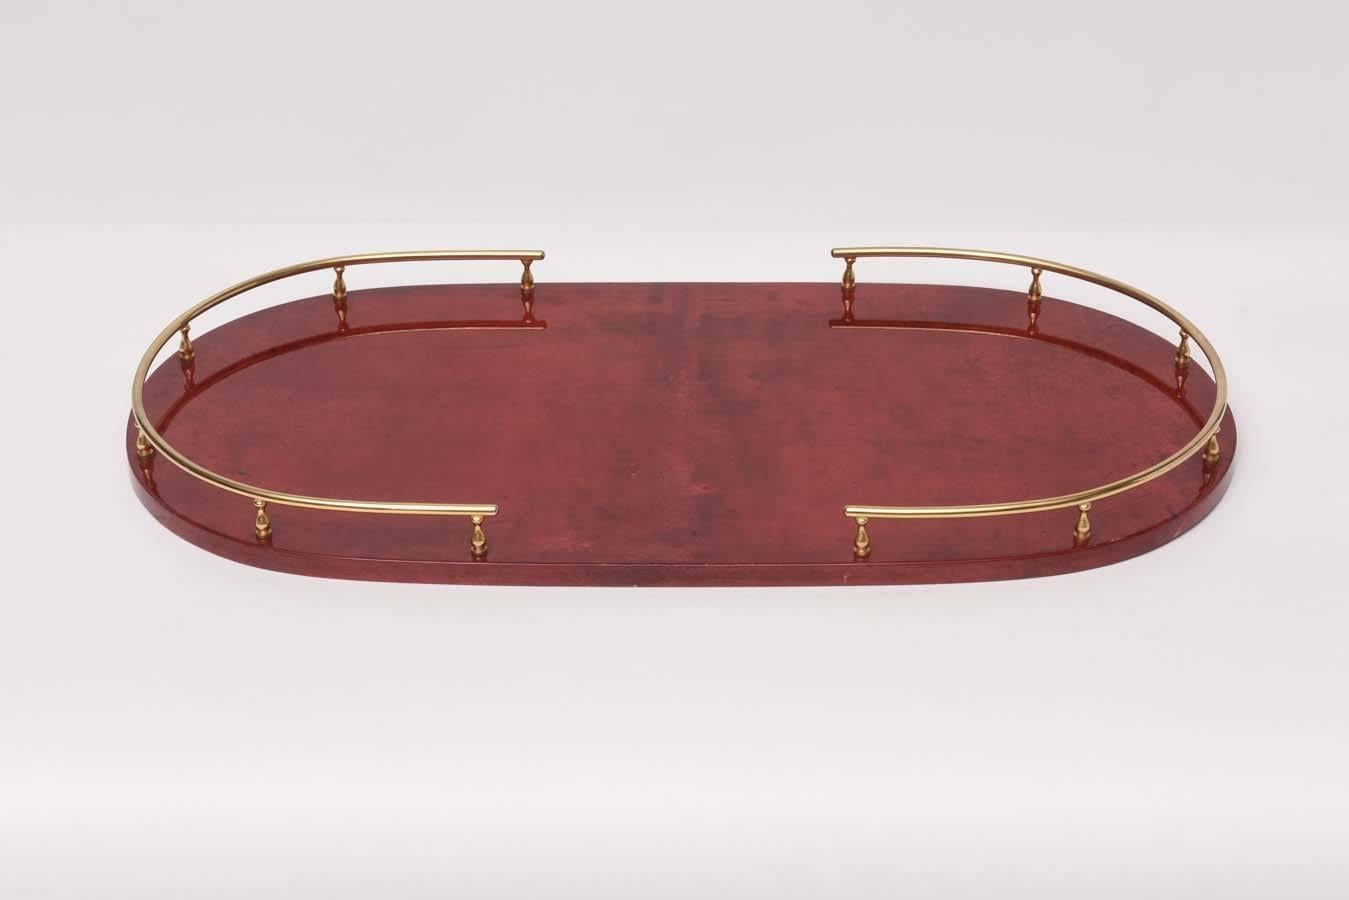 Red parchment serving tray by Aldo Tura, circa 1960.